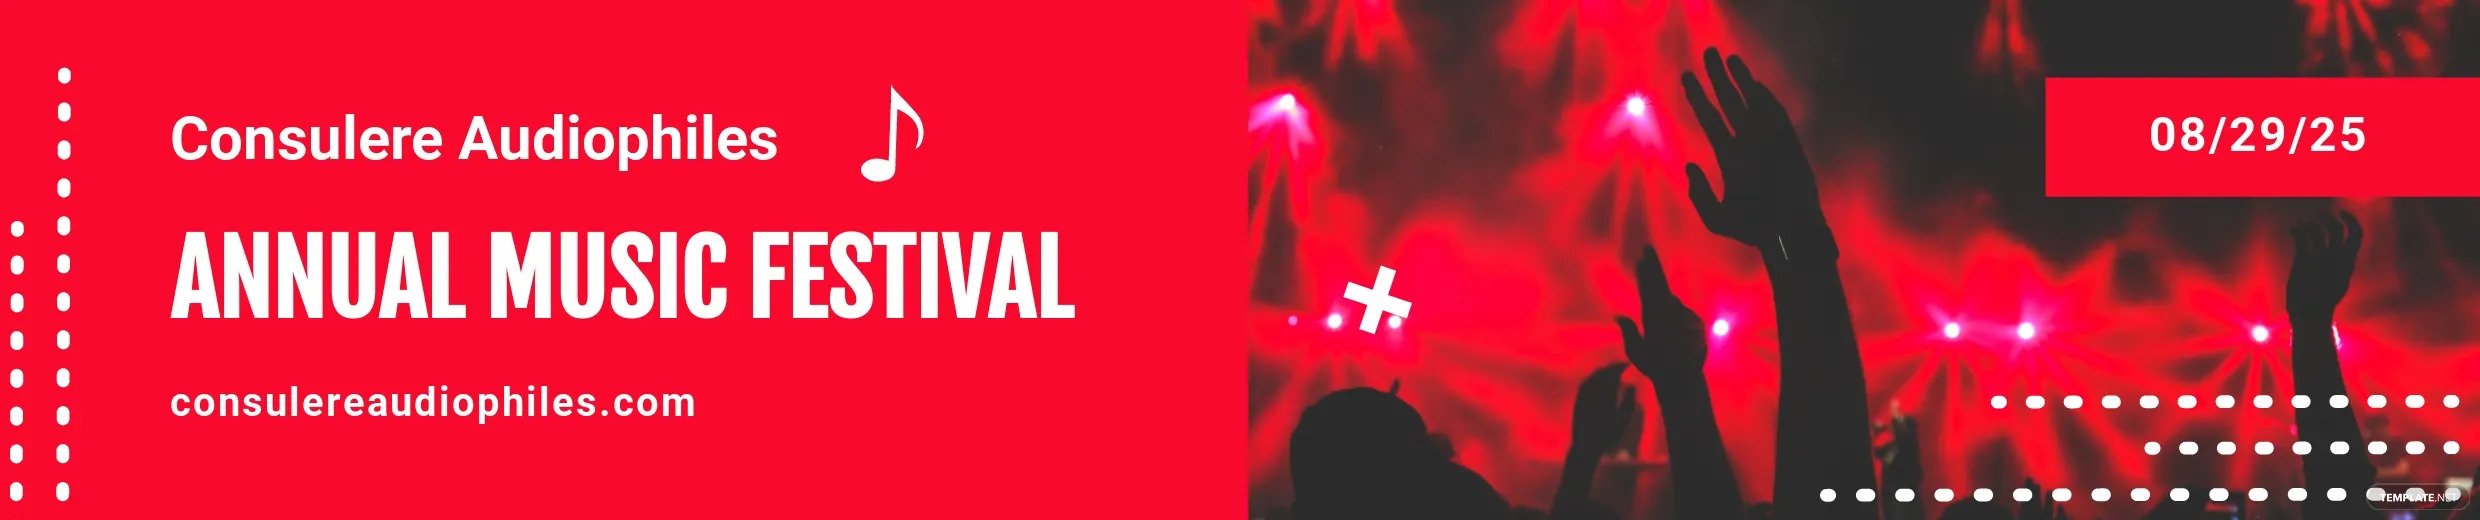 annual music festival soundcloud banner ideas and examples